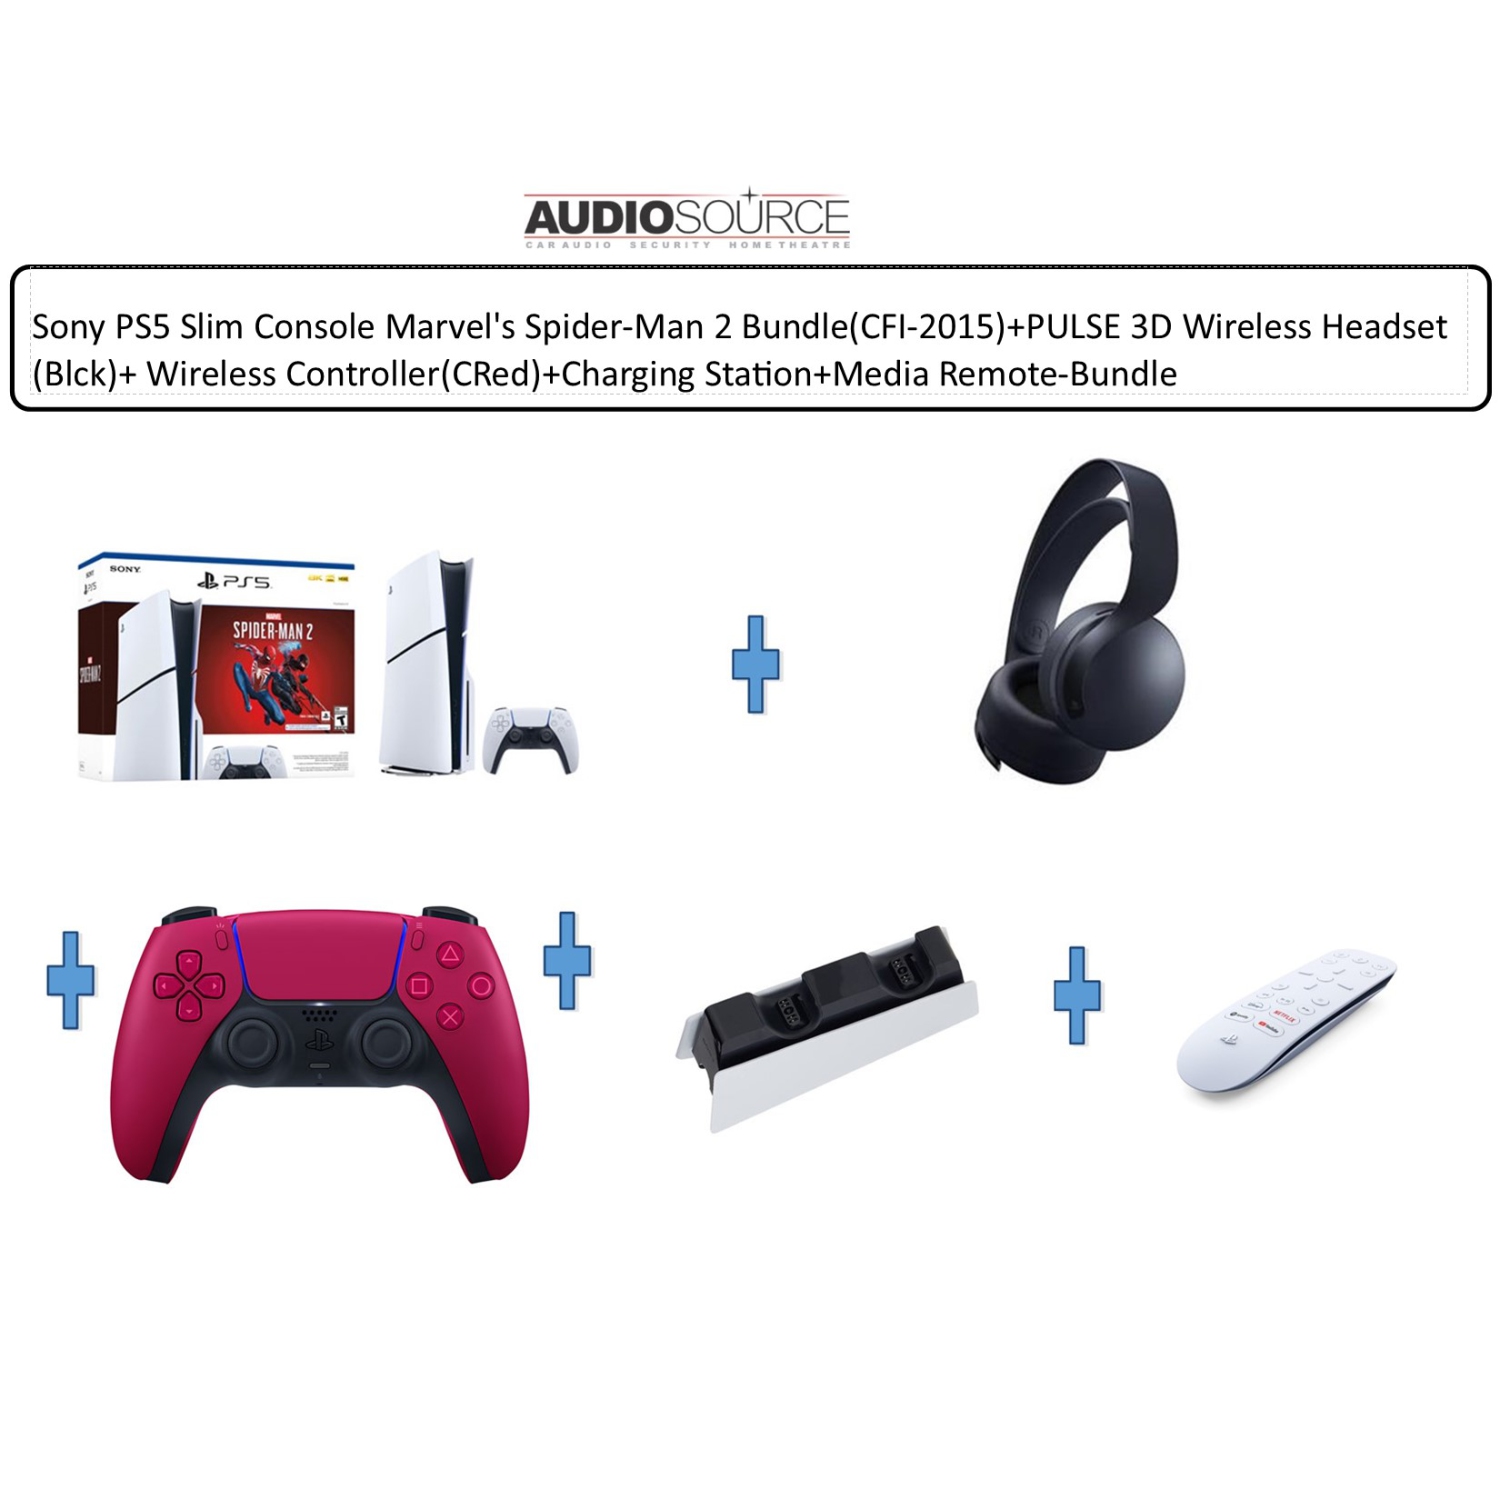 Sony PS5 Console Marvel's Spider-Man 2 Bundle(CFI-2015)+PULSE 3D Wireless Headset(Blck)+ Wireless Controller(Sblue)+Charging Station+Media Remote-Bundle